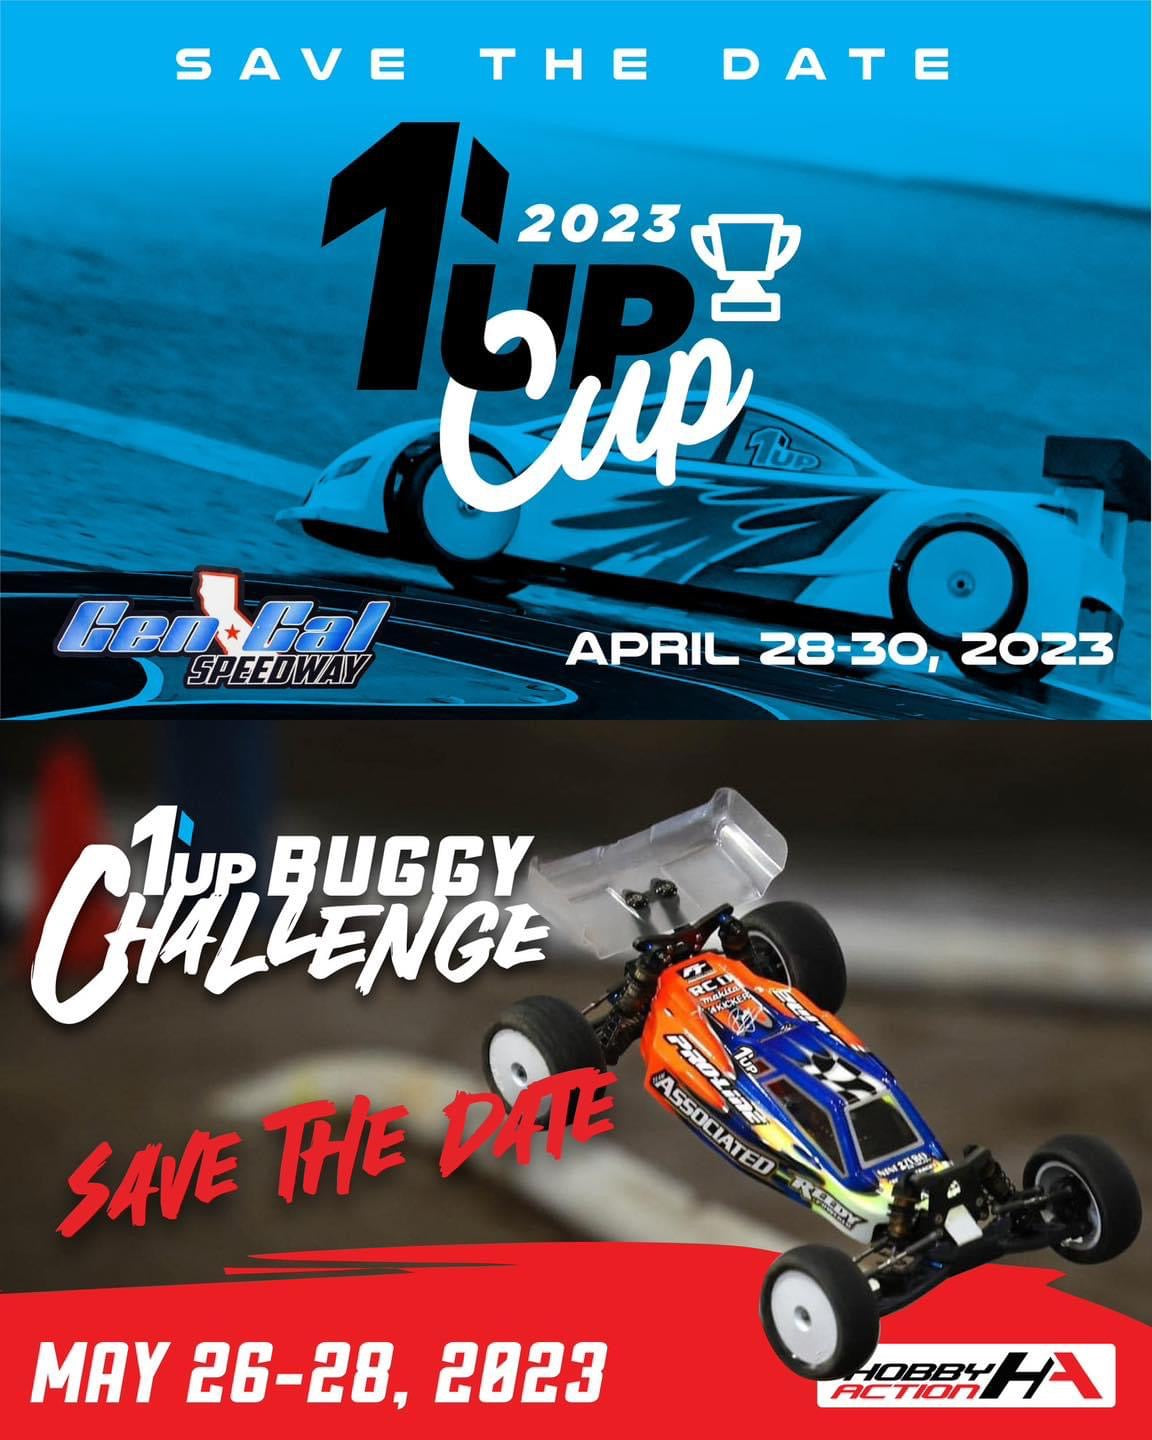 1up Buggy Challenge and 1up Cup Announcement Dates